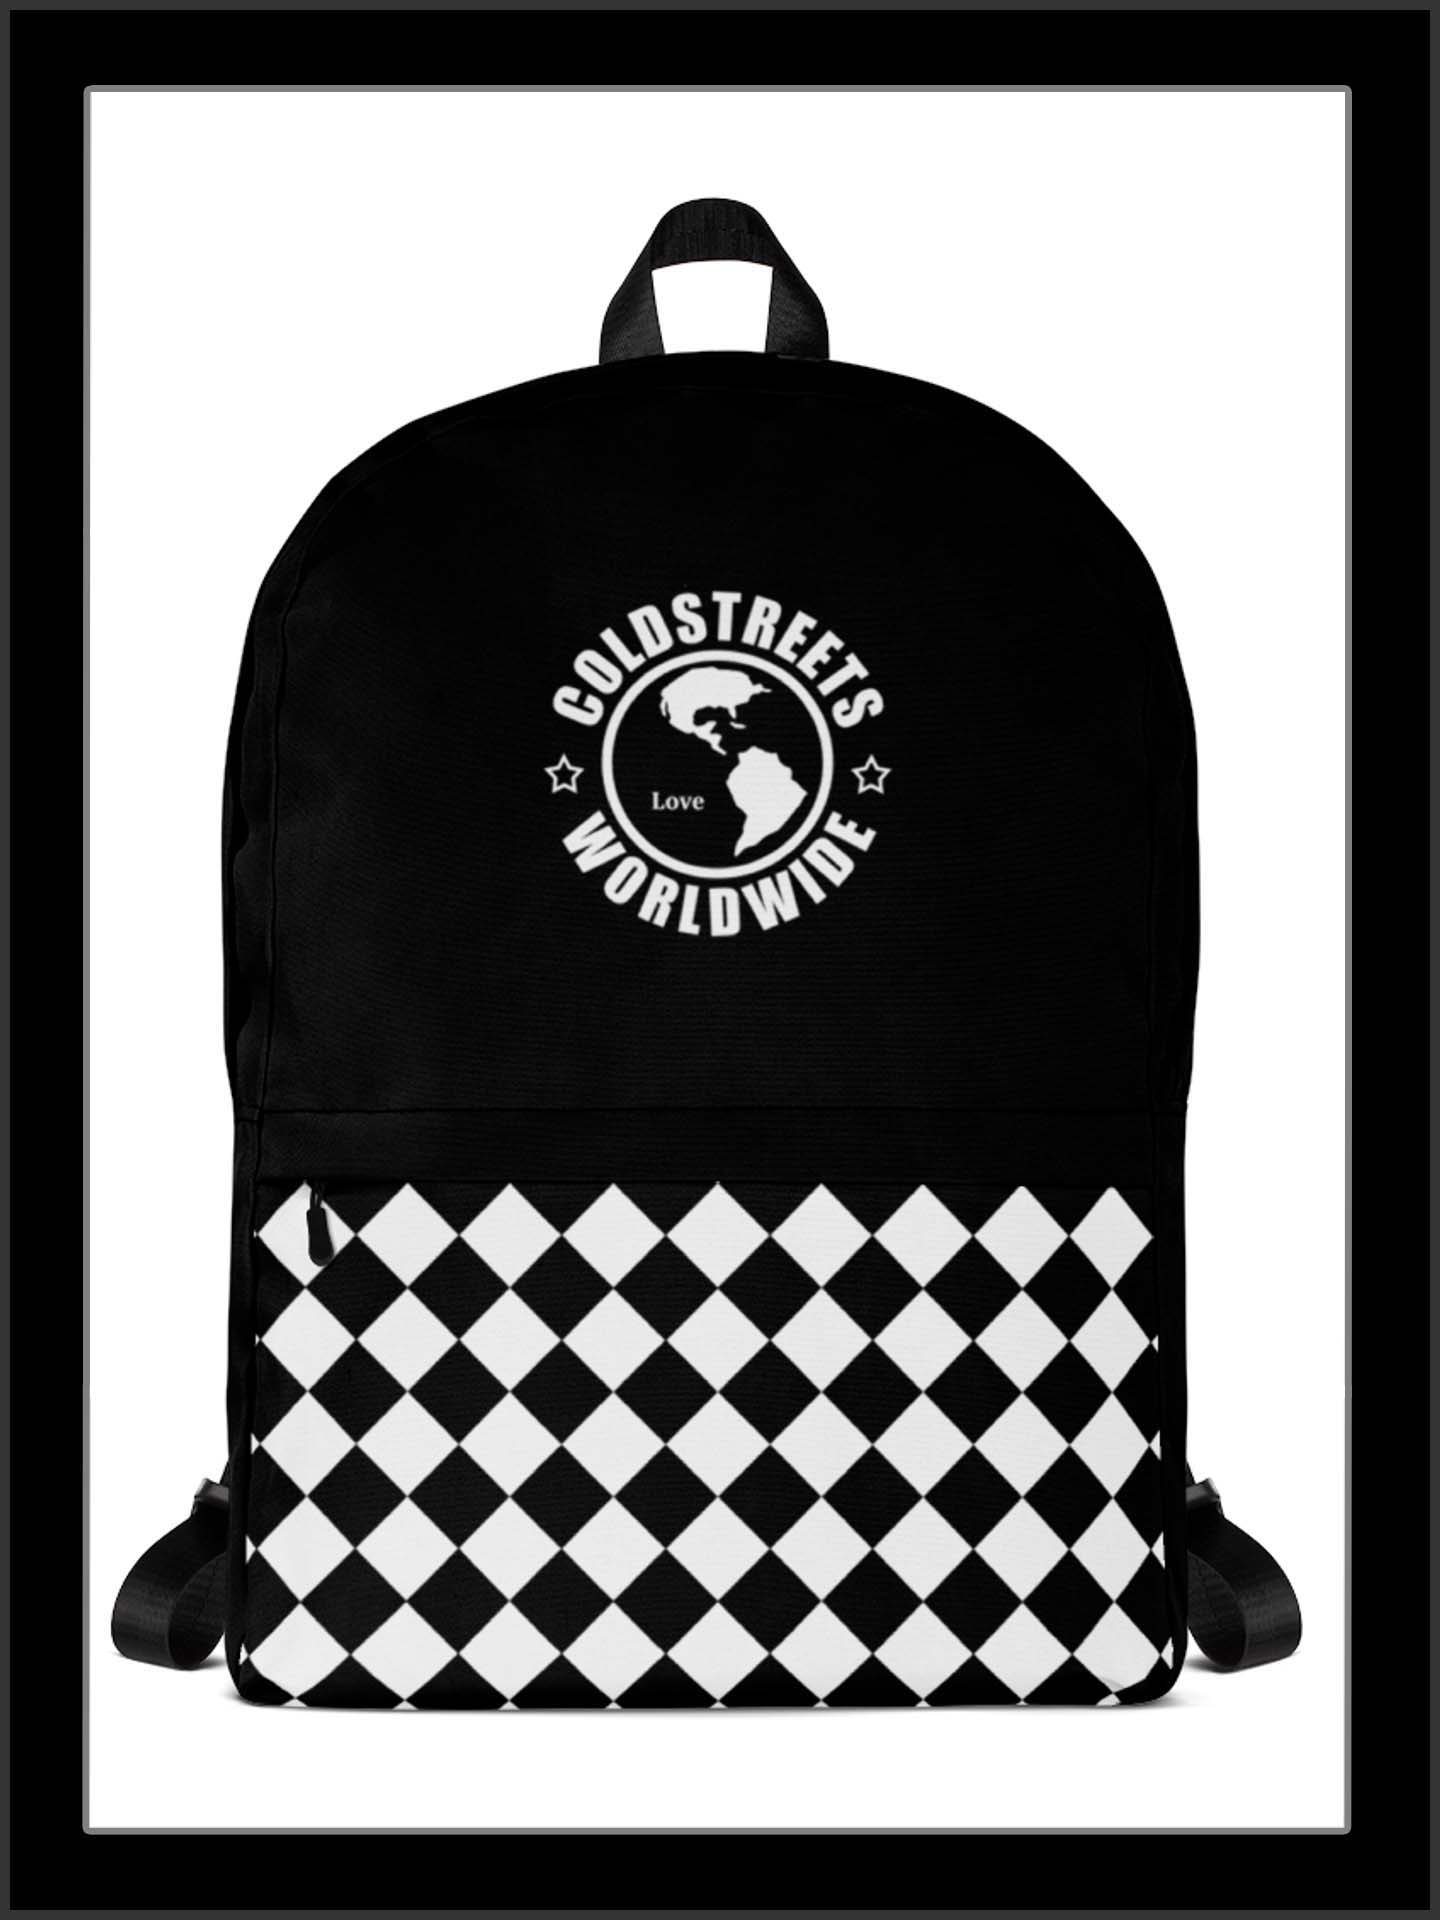 Cold Streets Connecticut Backpacks